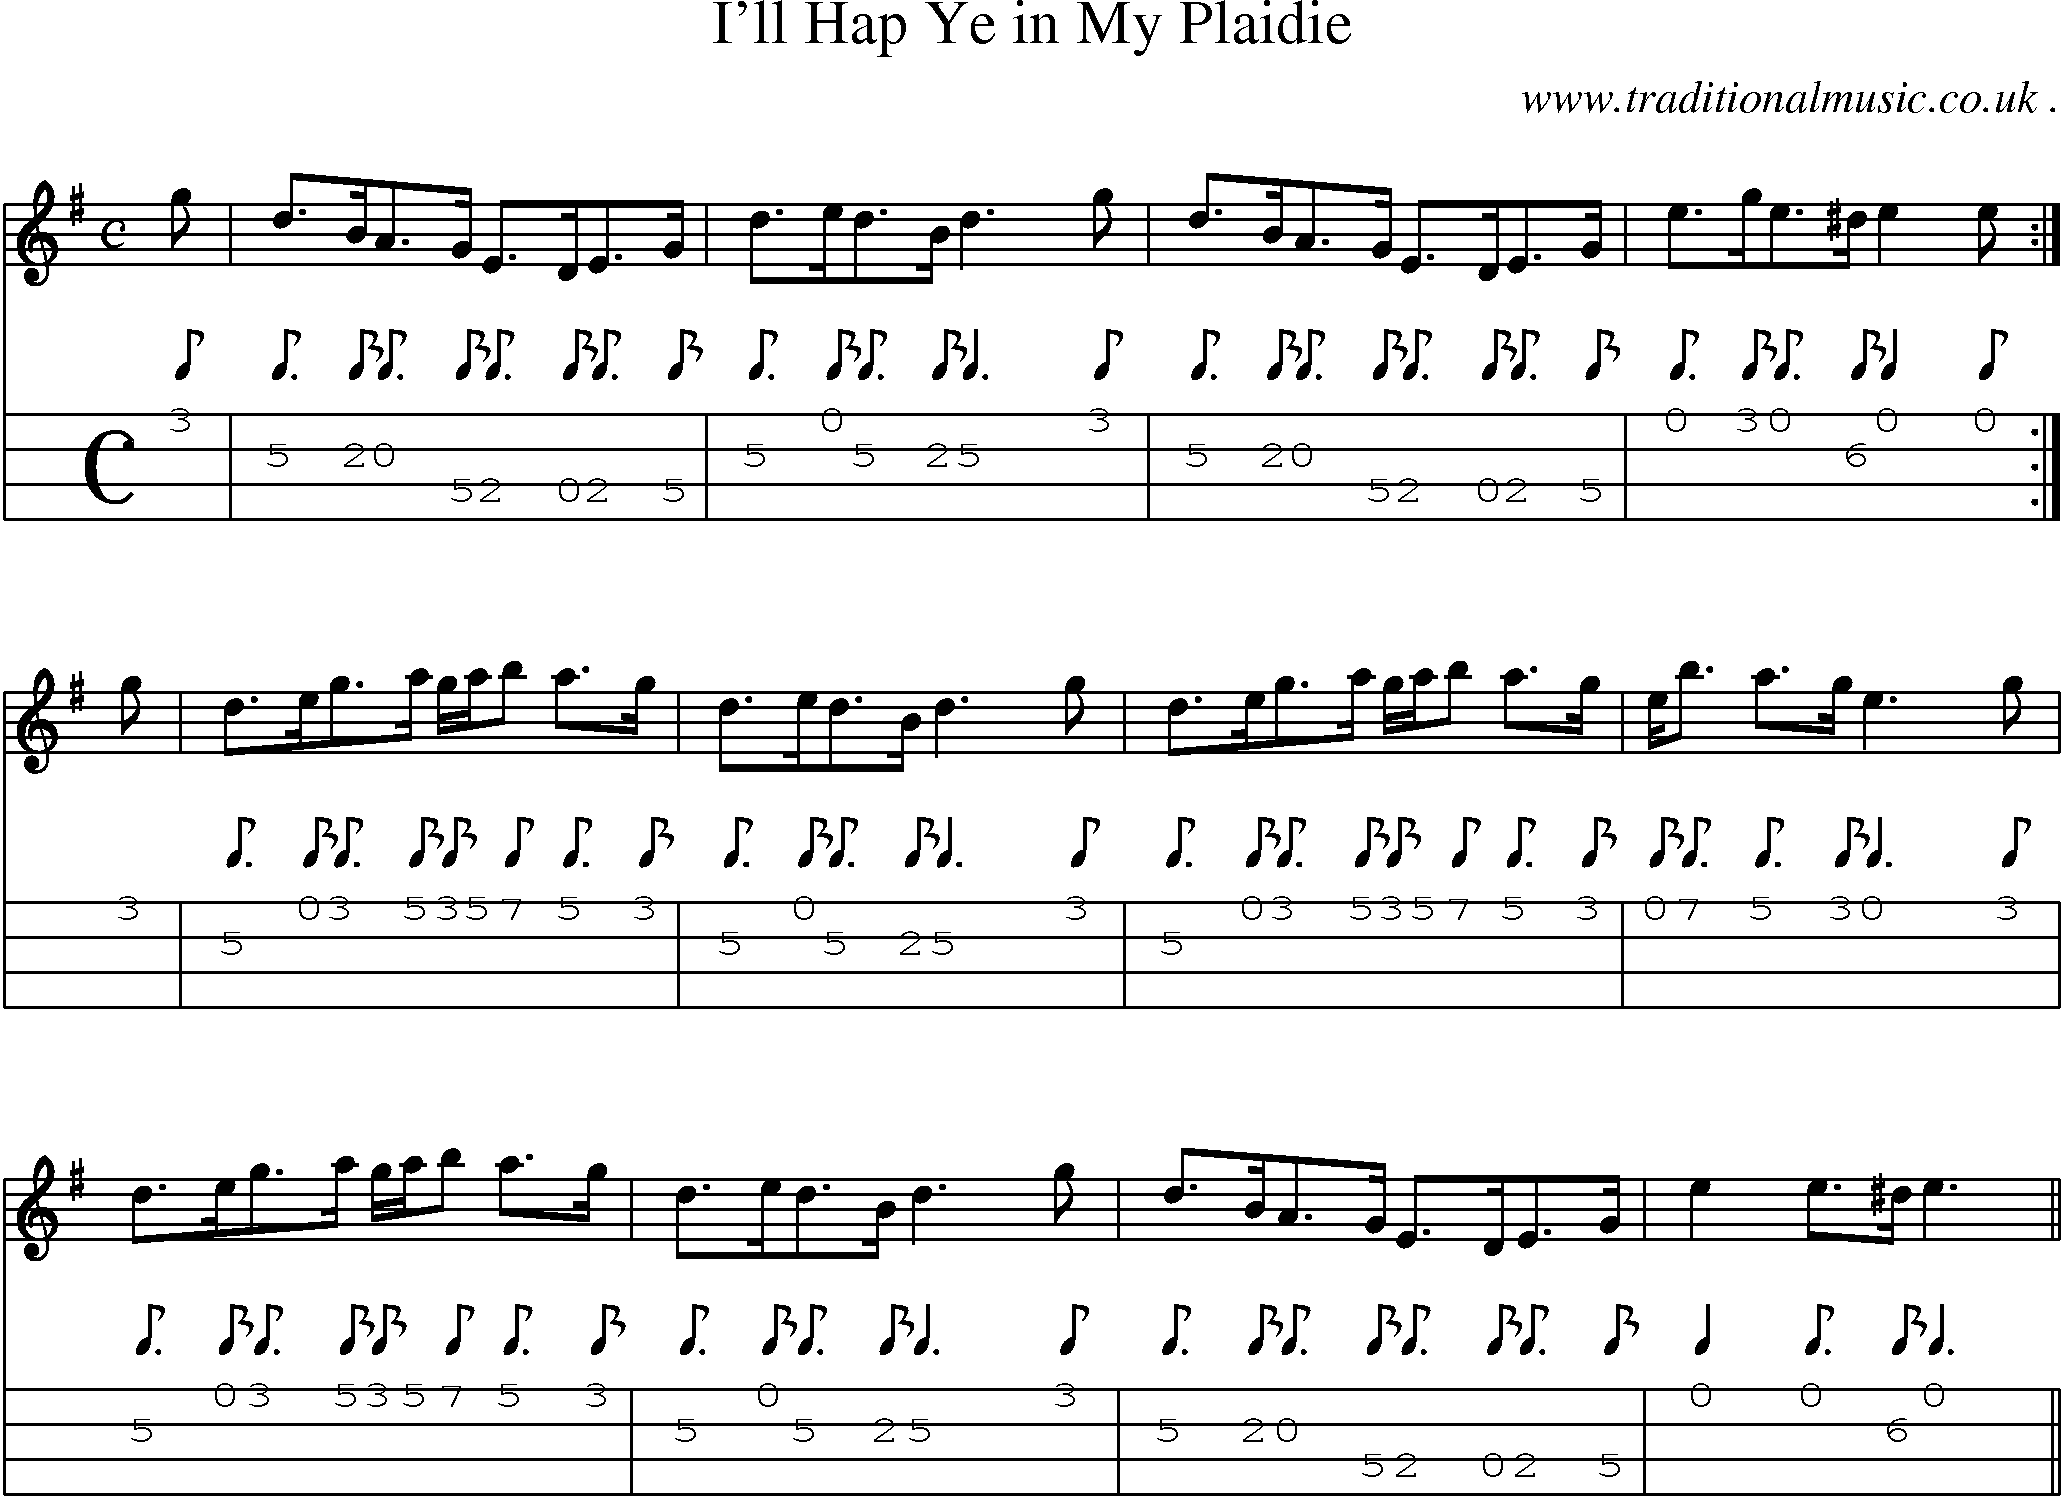 Sheet-music  score, Chords and Mandolin Tabs for Ill Hap Ye In My Plaidie